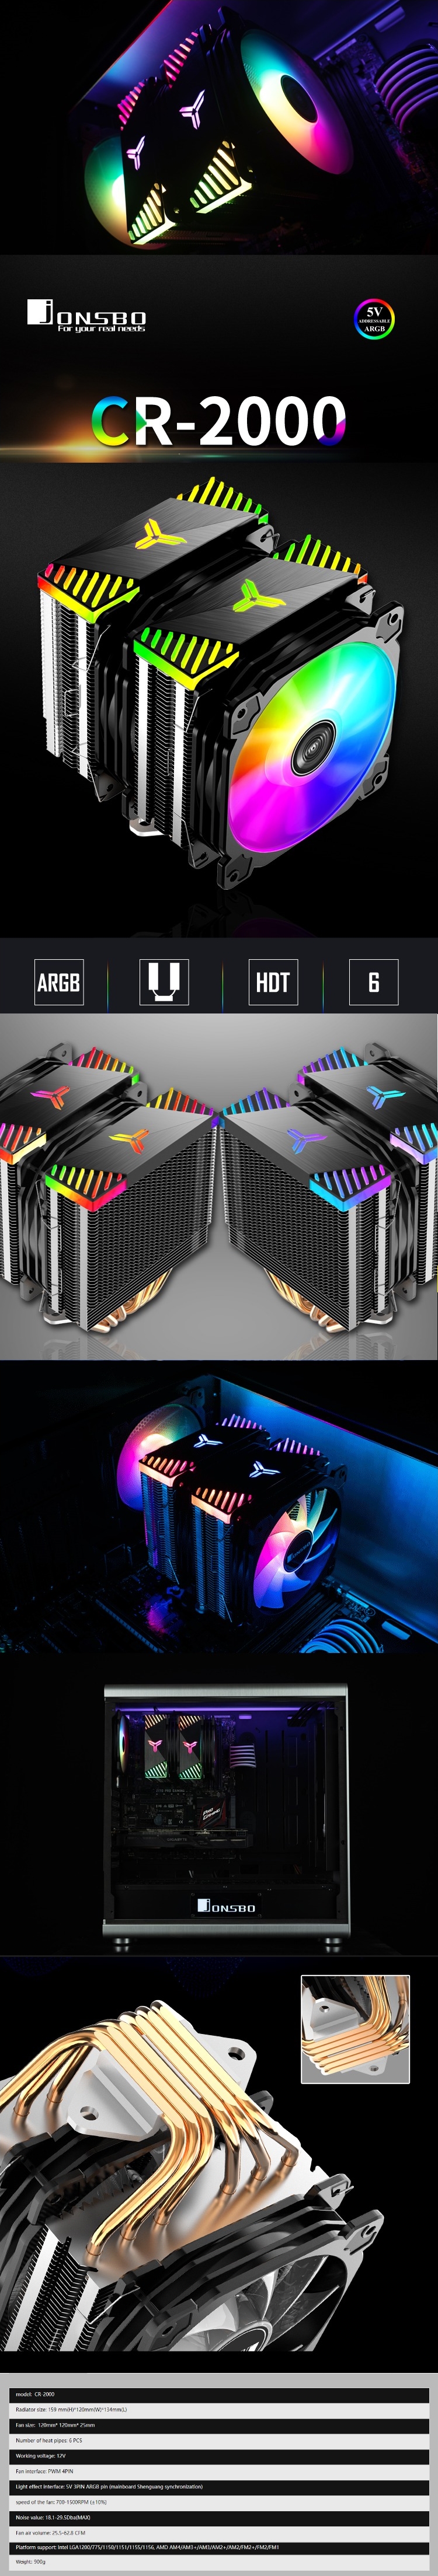 A large marketing image providing additional information about the product Jonsbo CR-2000GT ARGB LED CPU Cooler - Additional alt info not provided